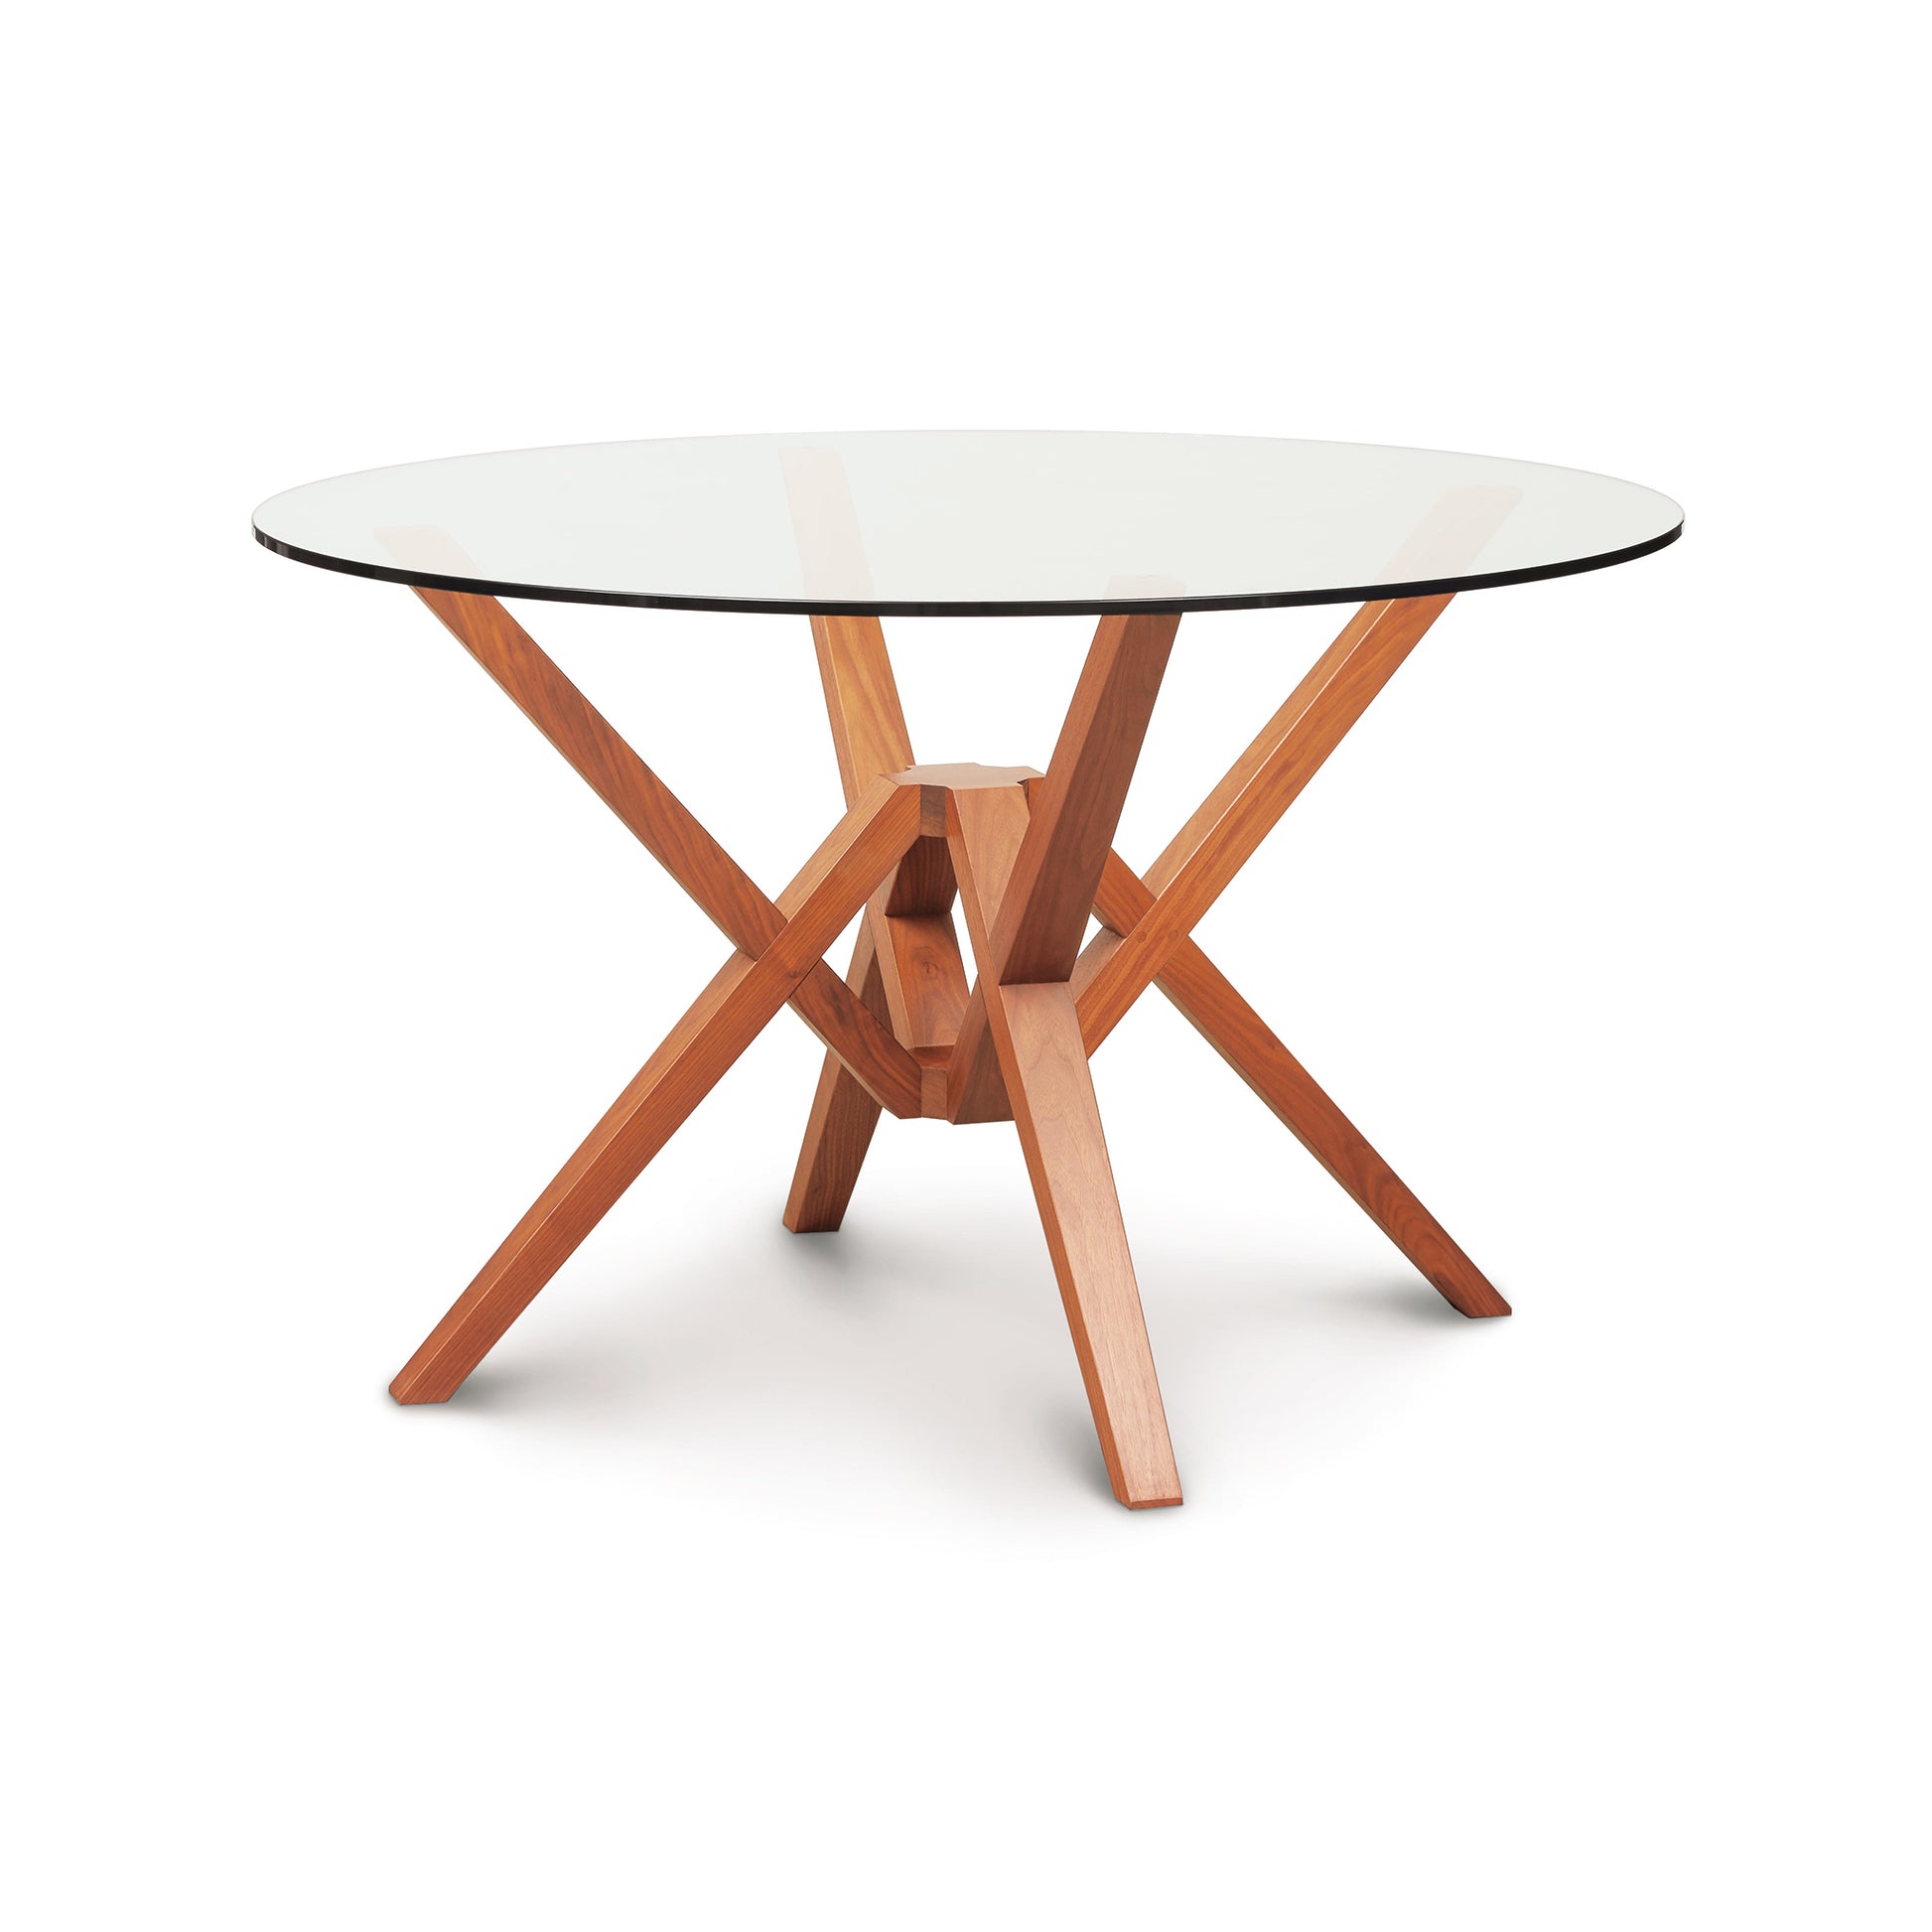 A modern Copeland Furniture Exeter Round Glass Top Table with a solid wood base consisting of interlocking legs.